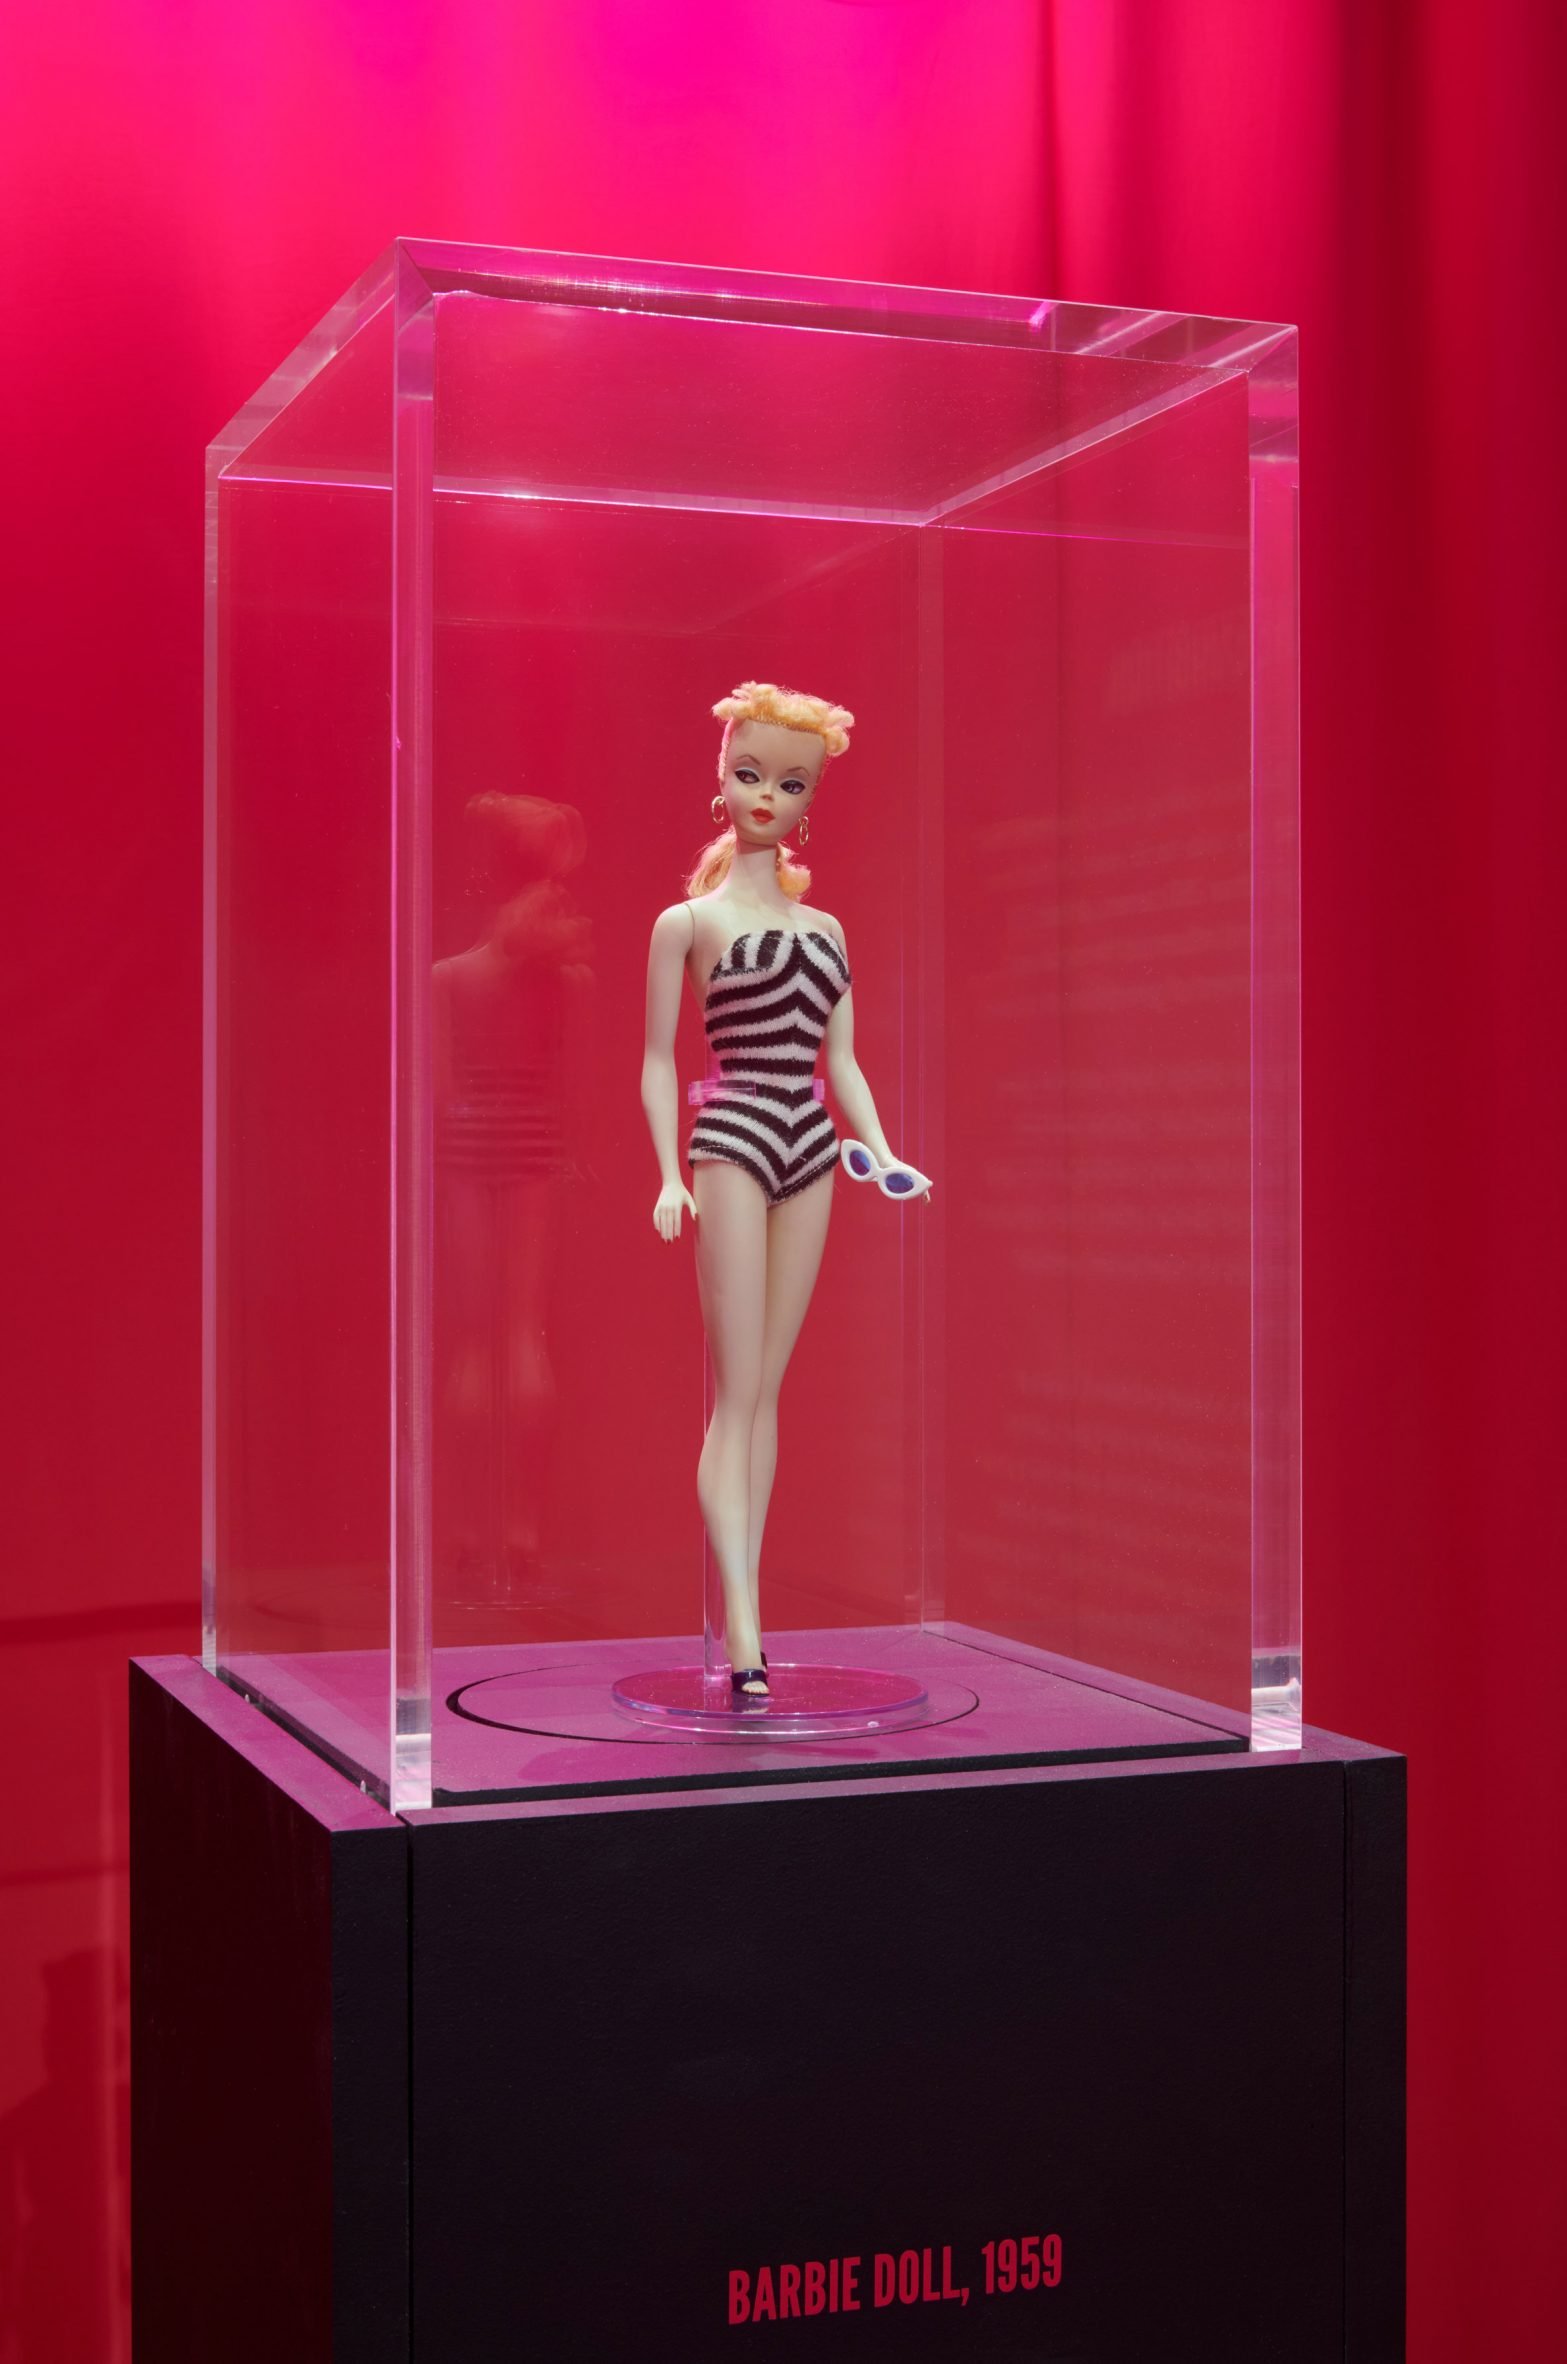 A first-edition Barbie designed in 1959